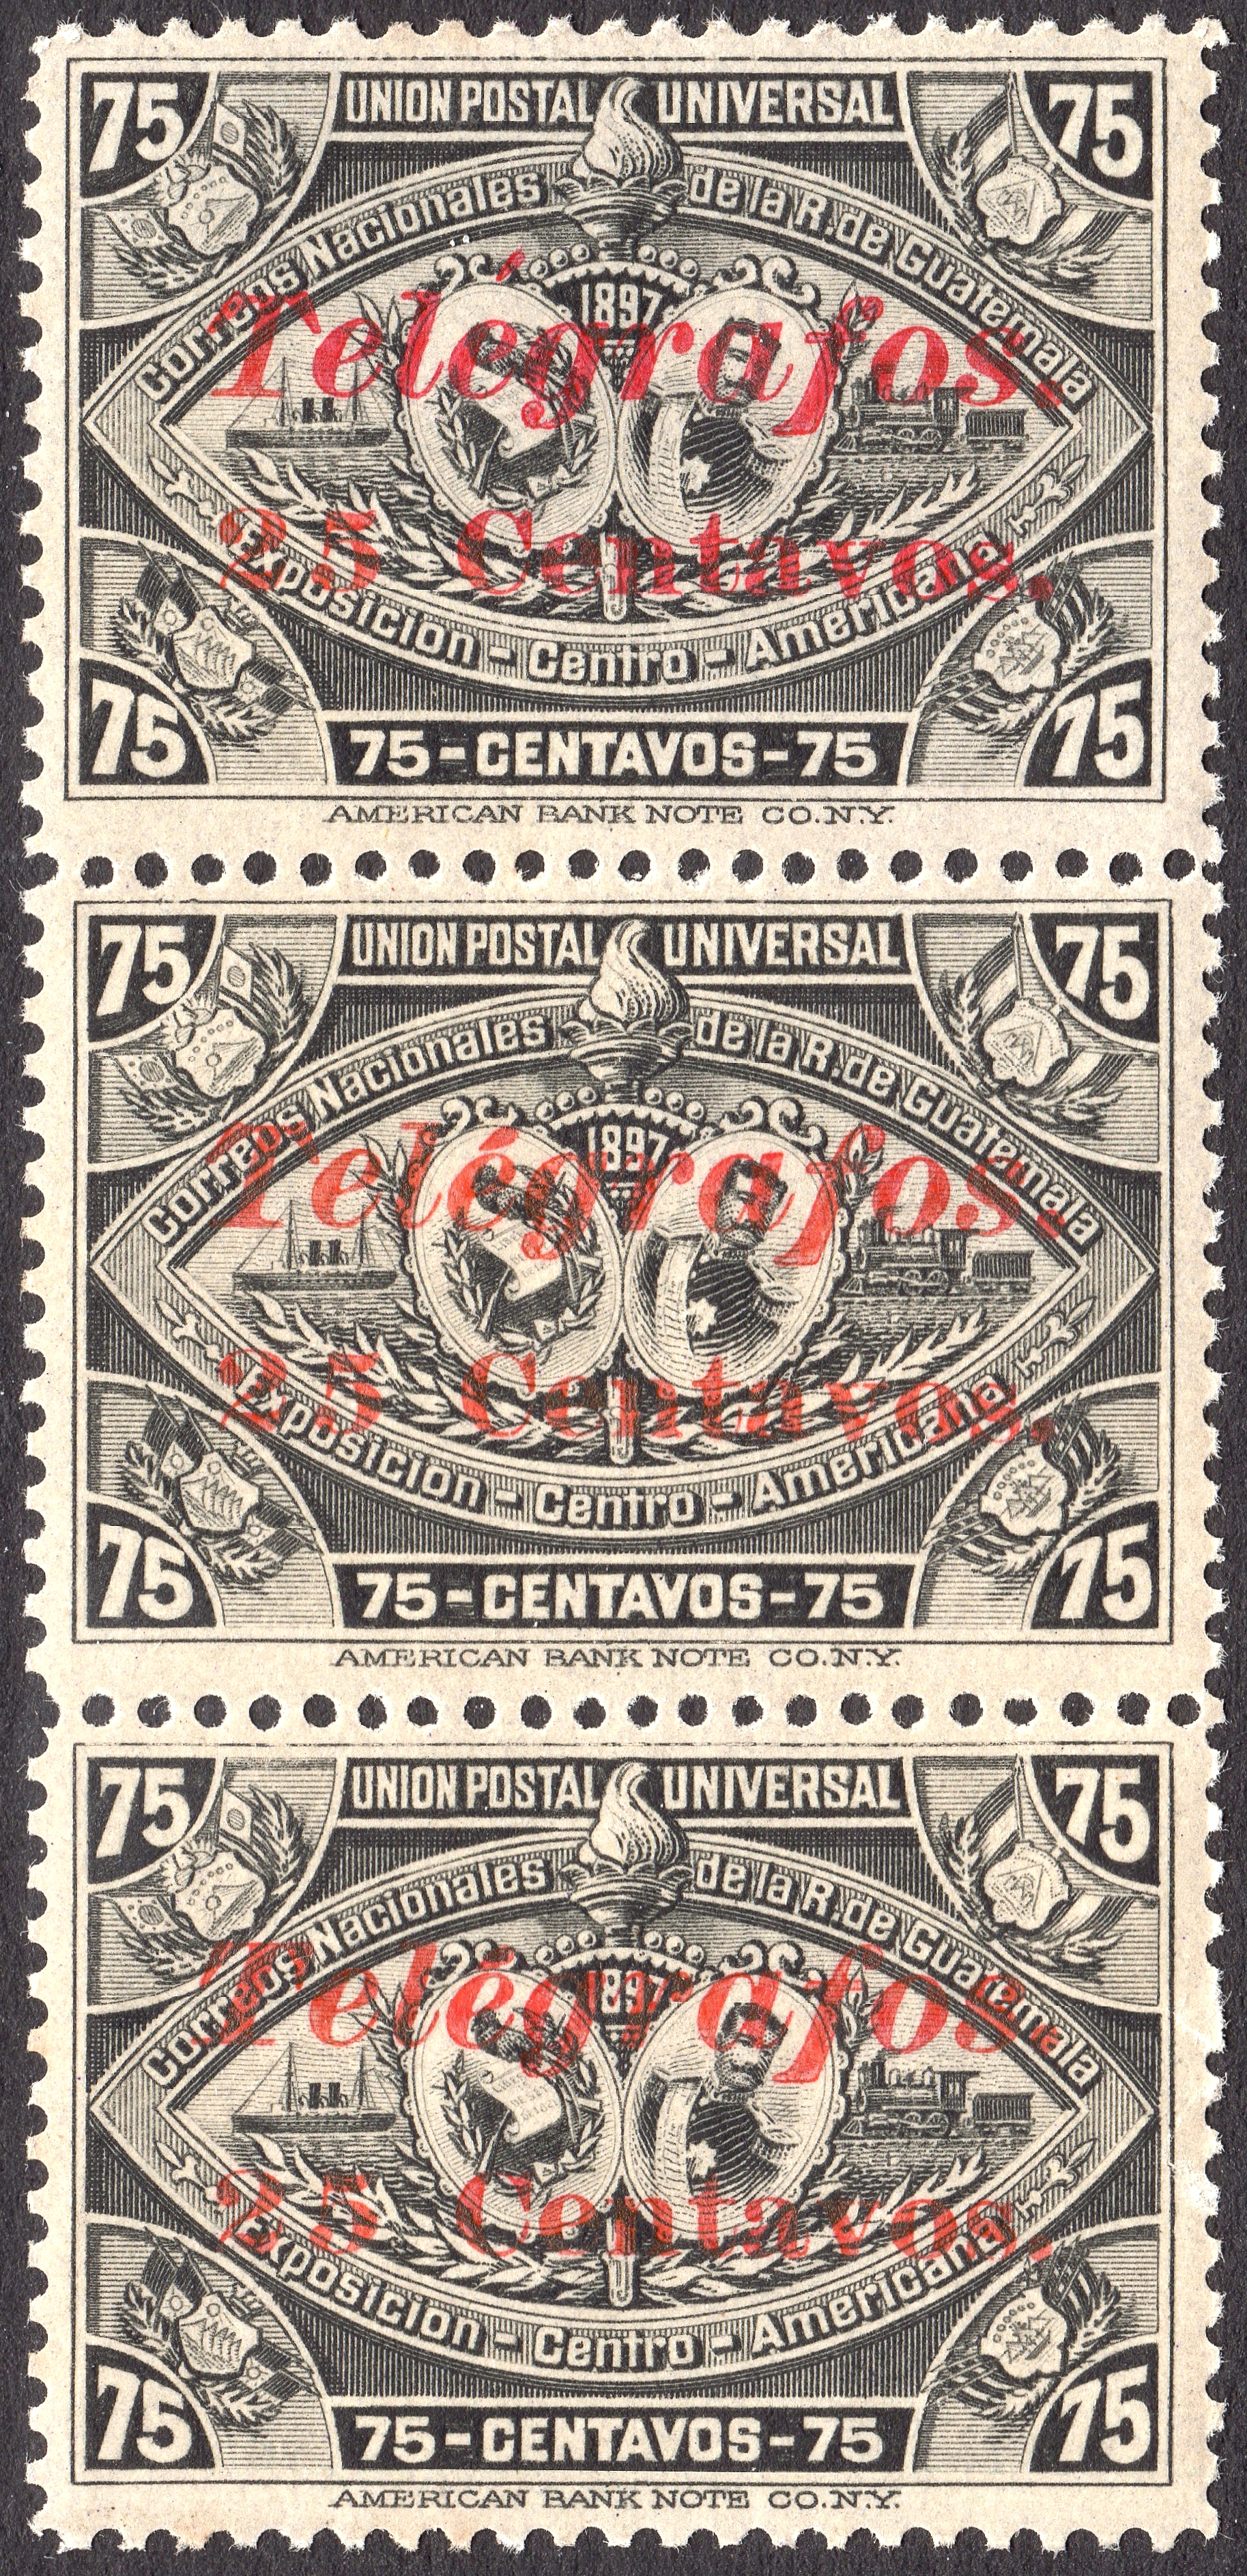 Guatemala 1898 telegraph stamps showing raised accent (top) and different shaped T (bottom)